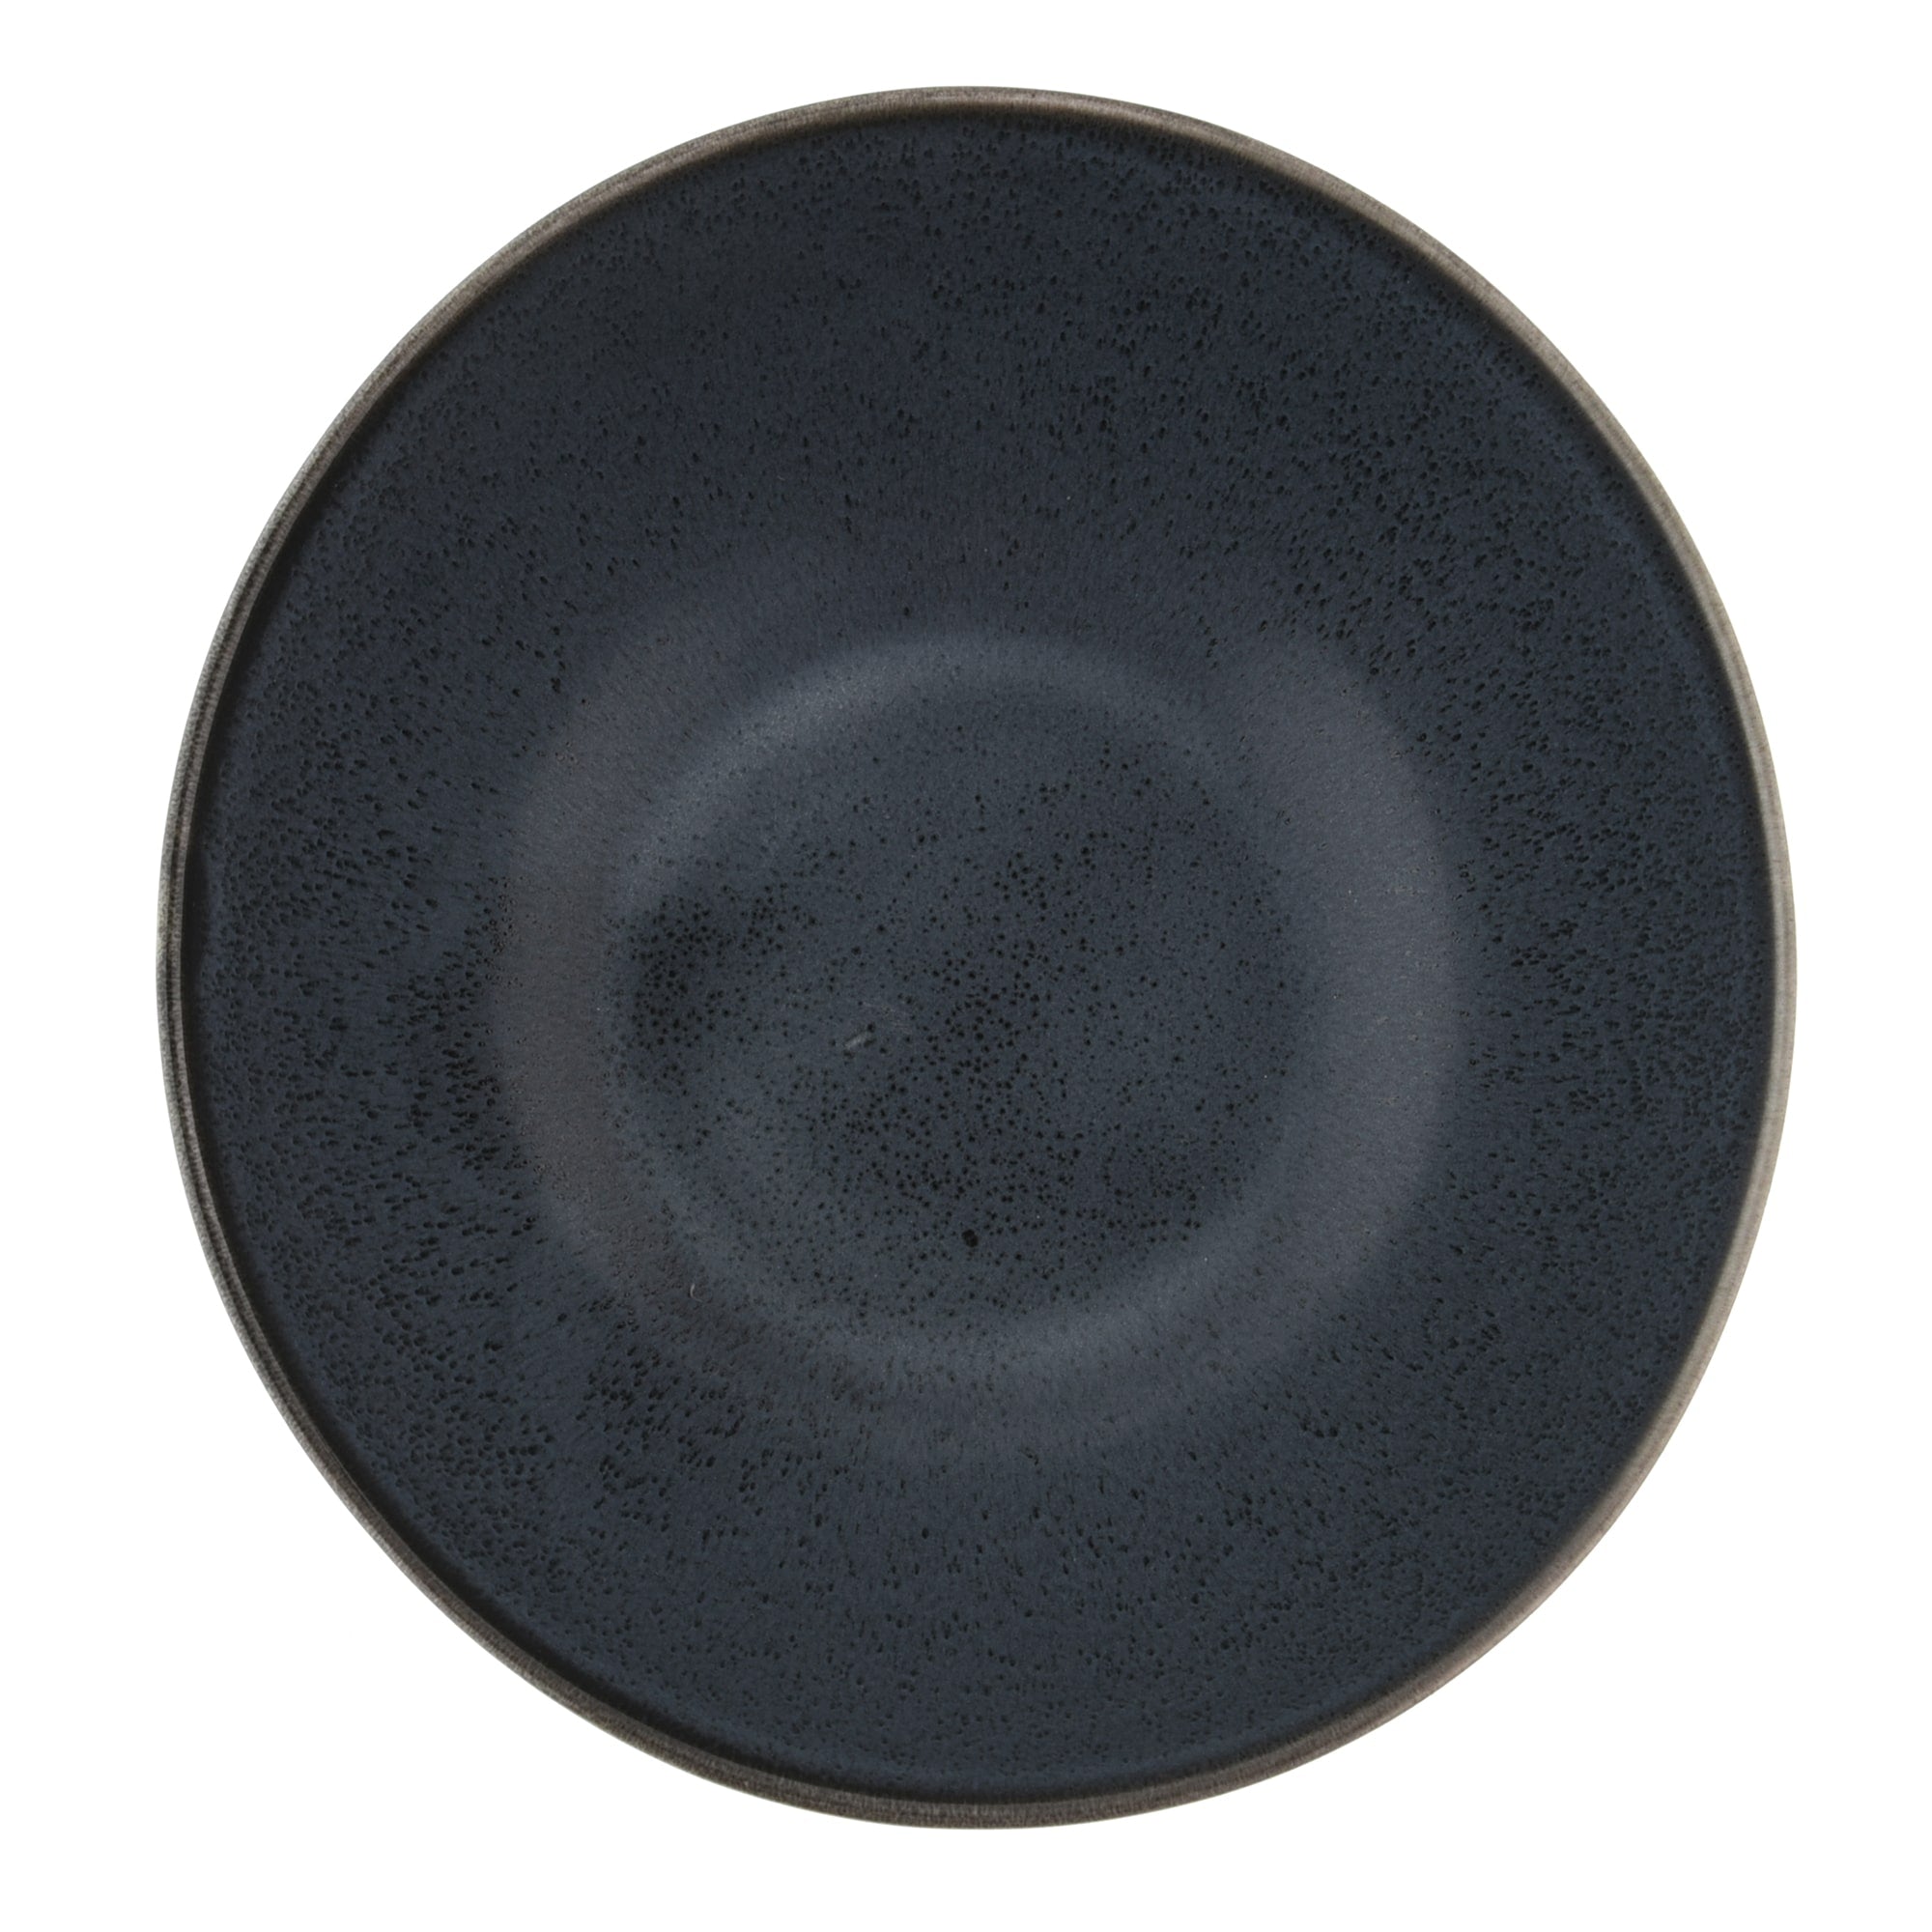 TIME BLACK Plates and Bowls Set